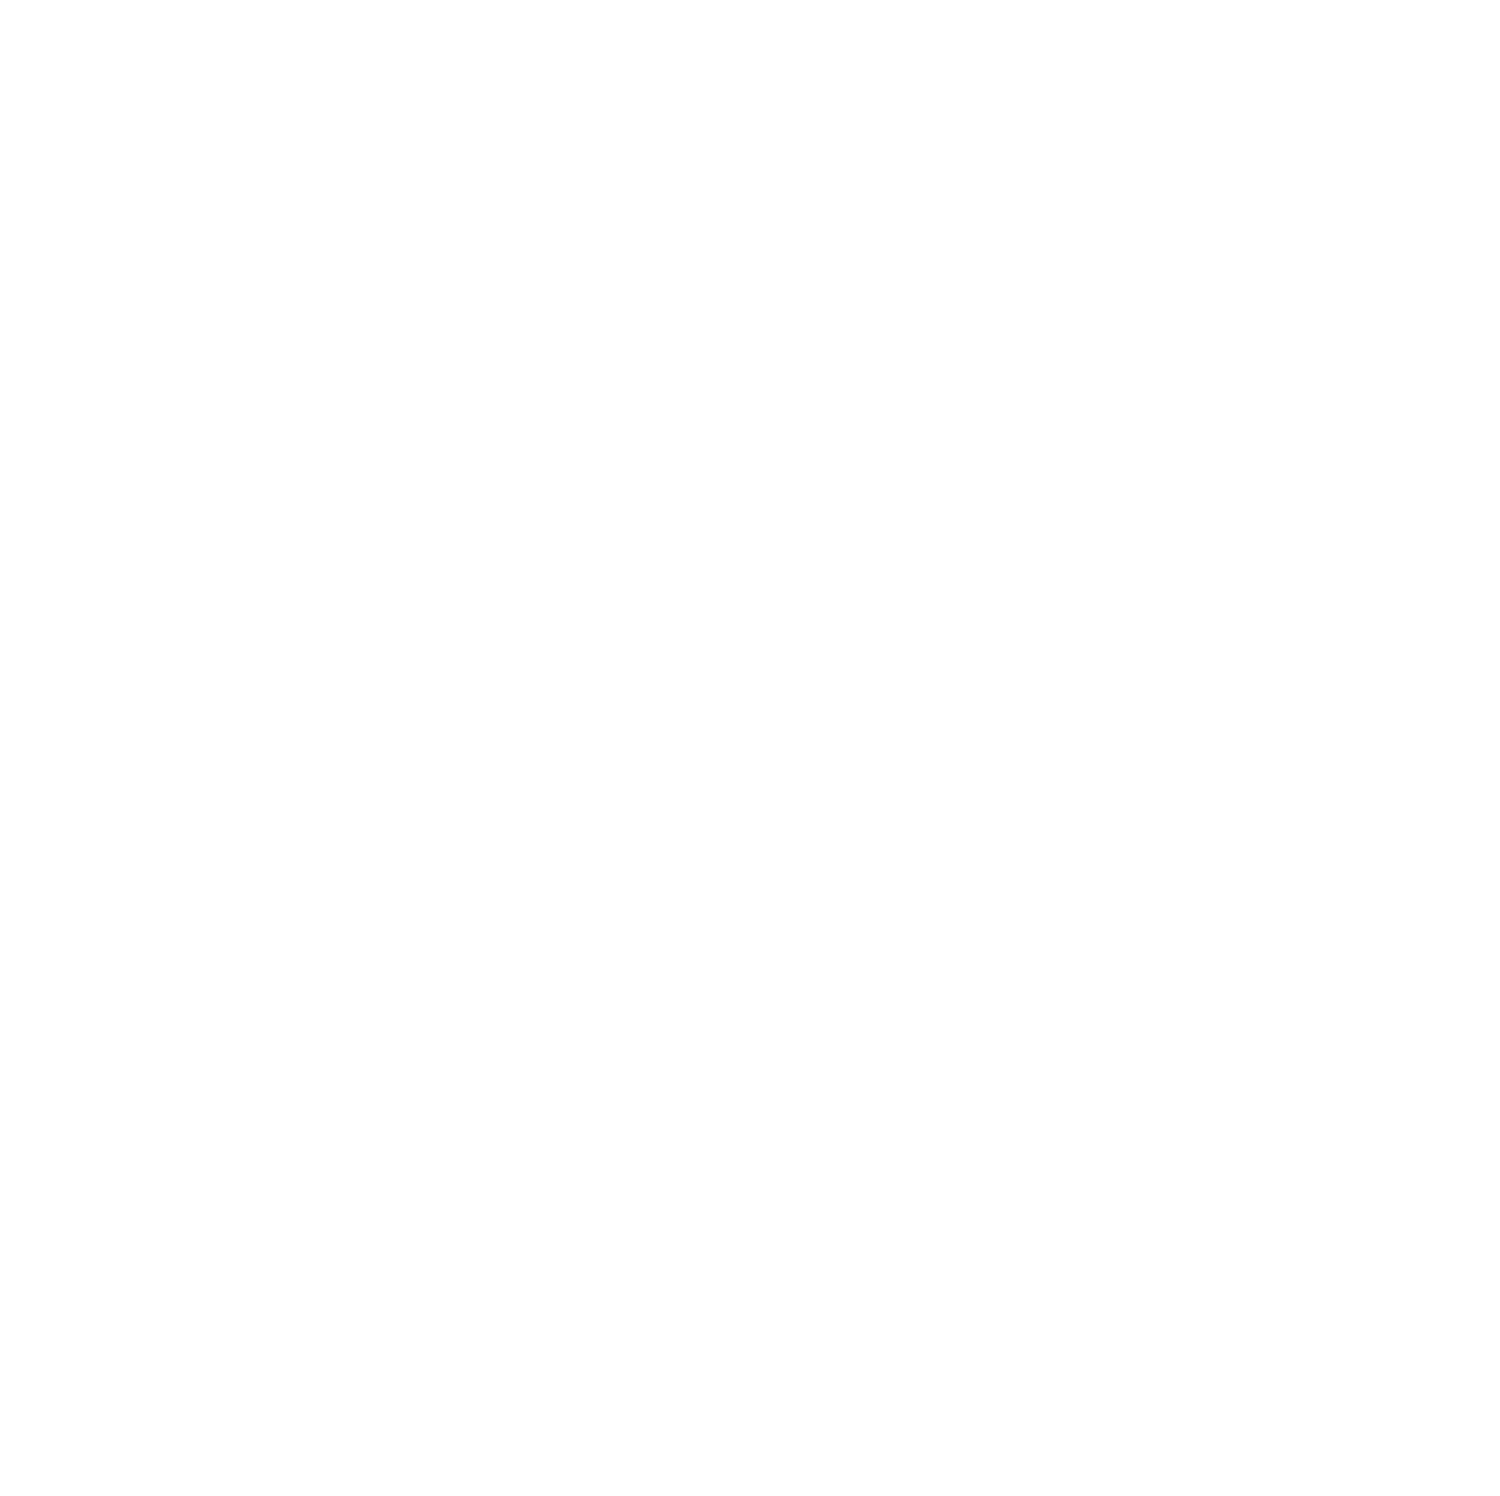 Strong Cabinetry